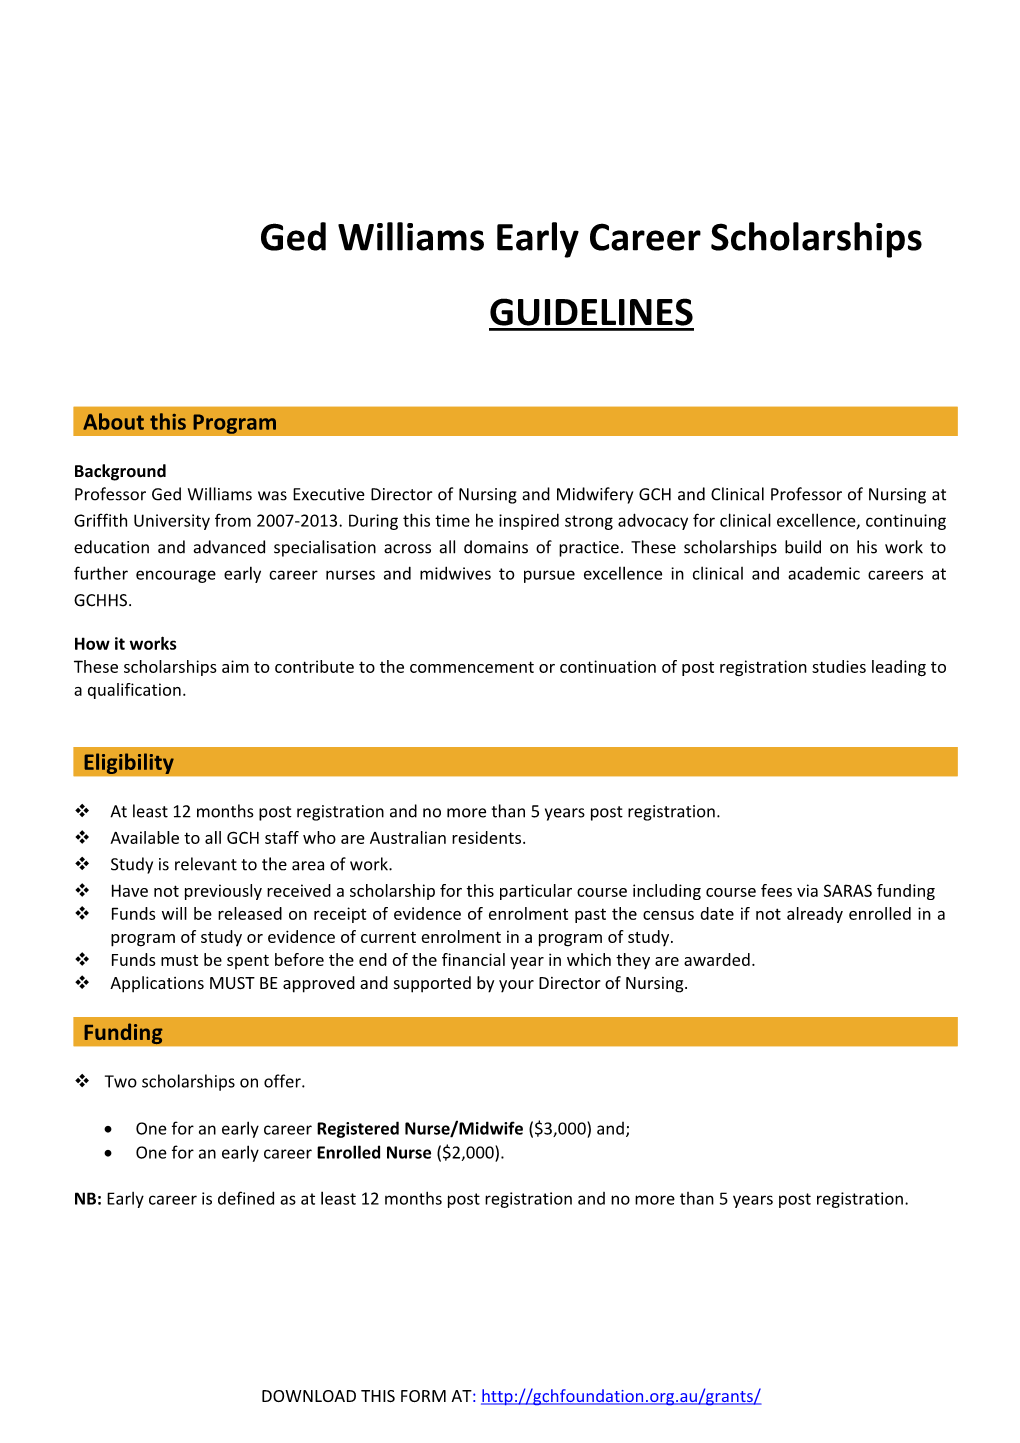 Ged Williams Early Career Scholarships